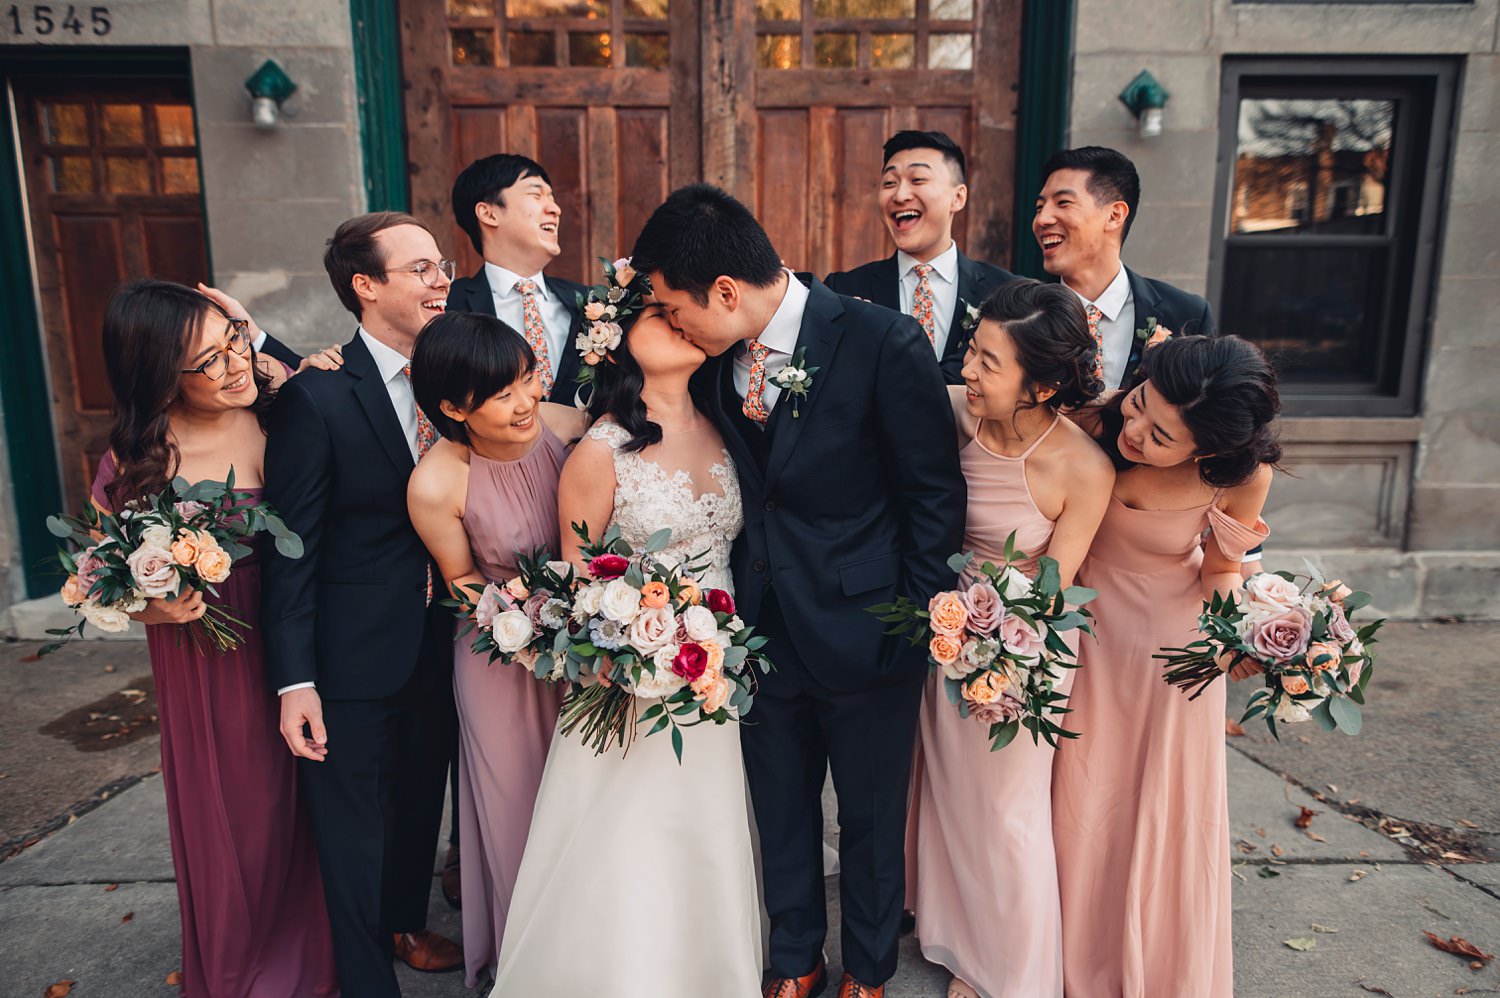 Firehouse Chicago Wedding - portraits bridal party